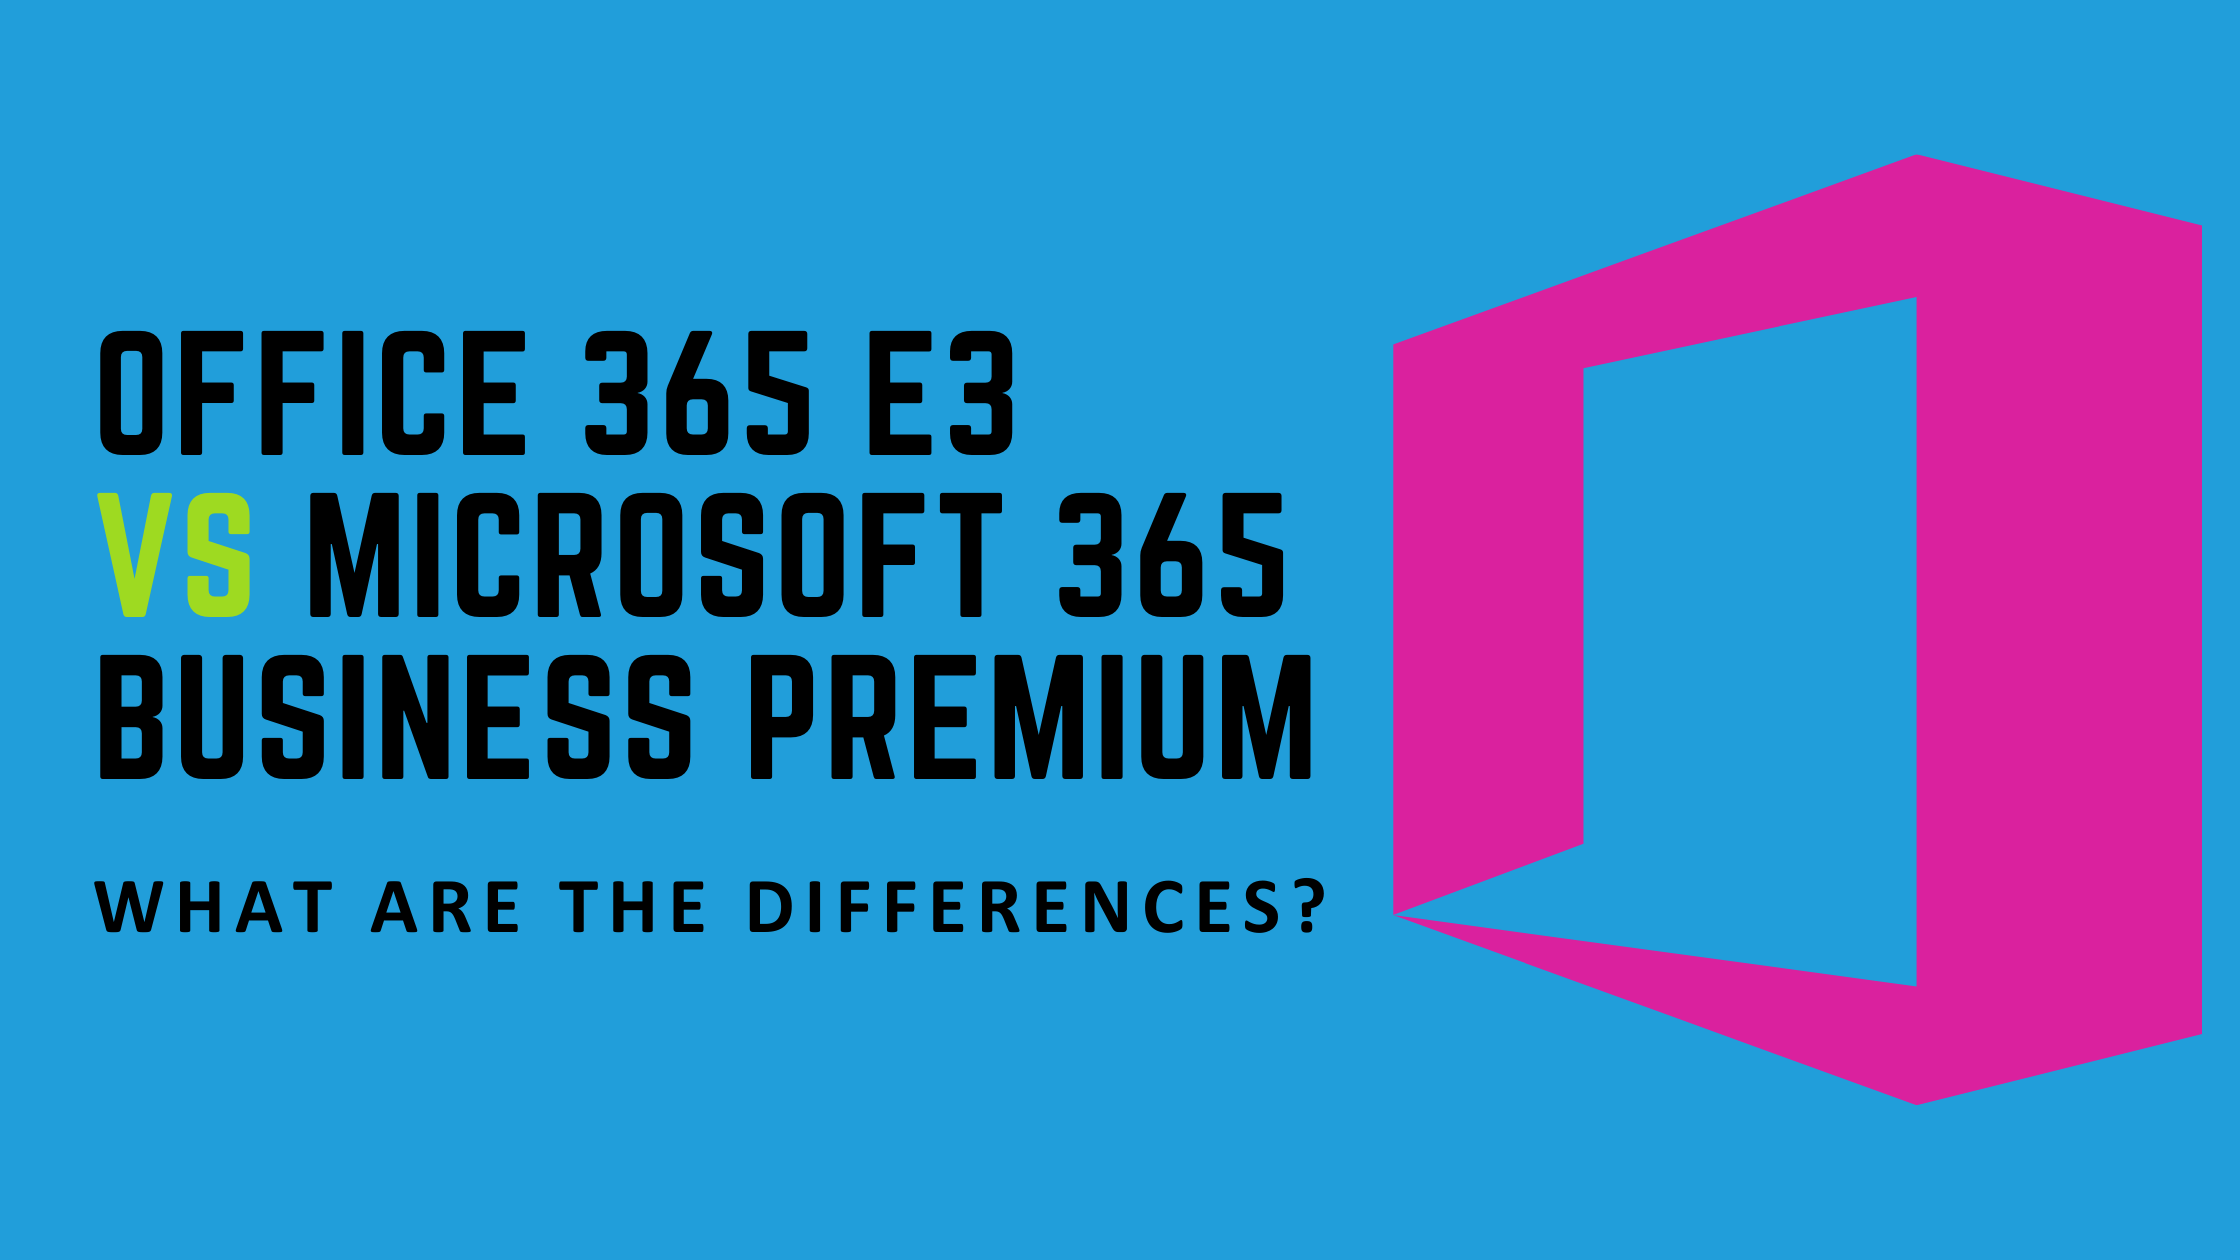 What are the differences between Microsoft 365 Business Premium and Office 365 E3?